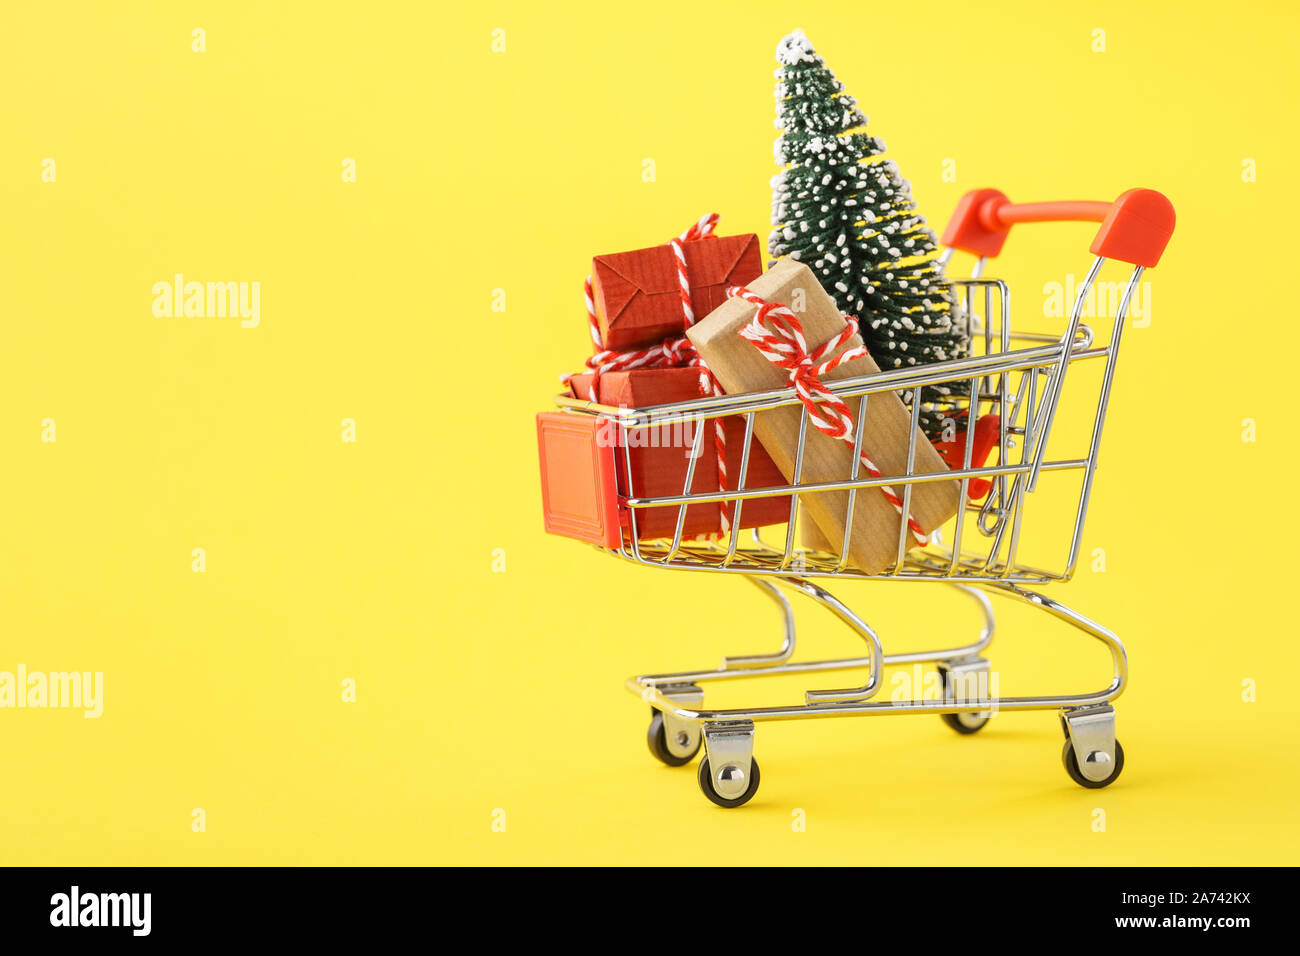 Shopping cart full of various gift boxes and a Christmas tree on yellow background. Christmas sale concept. Stock Photo